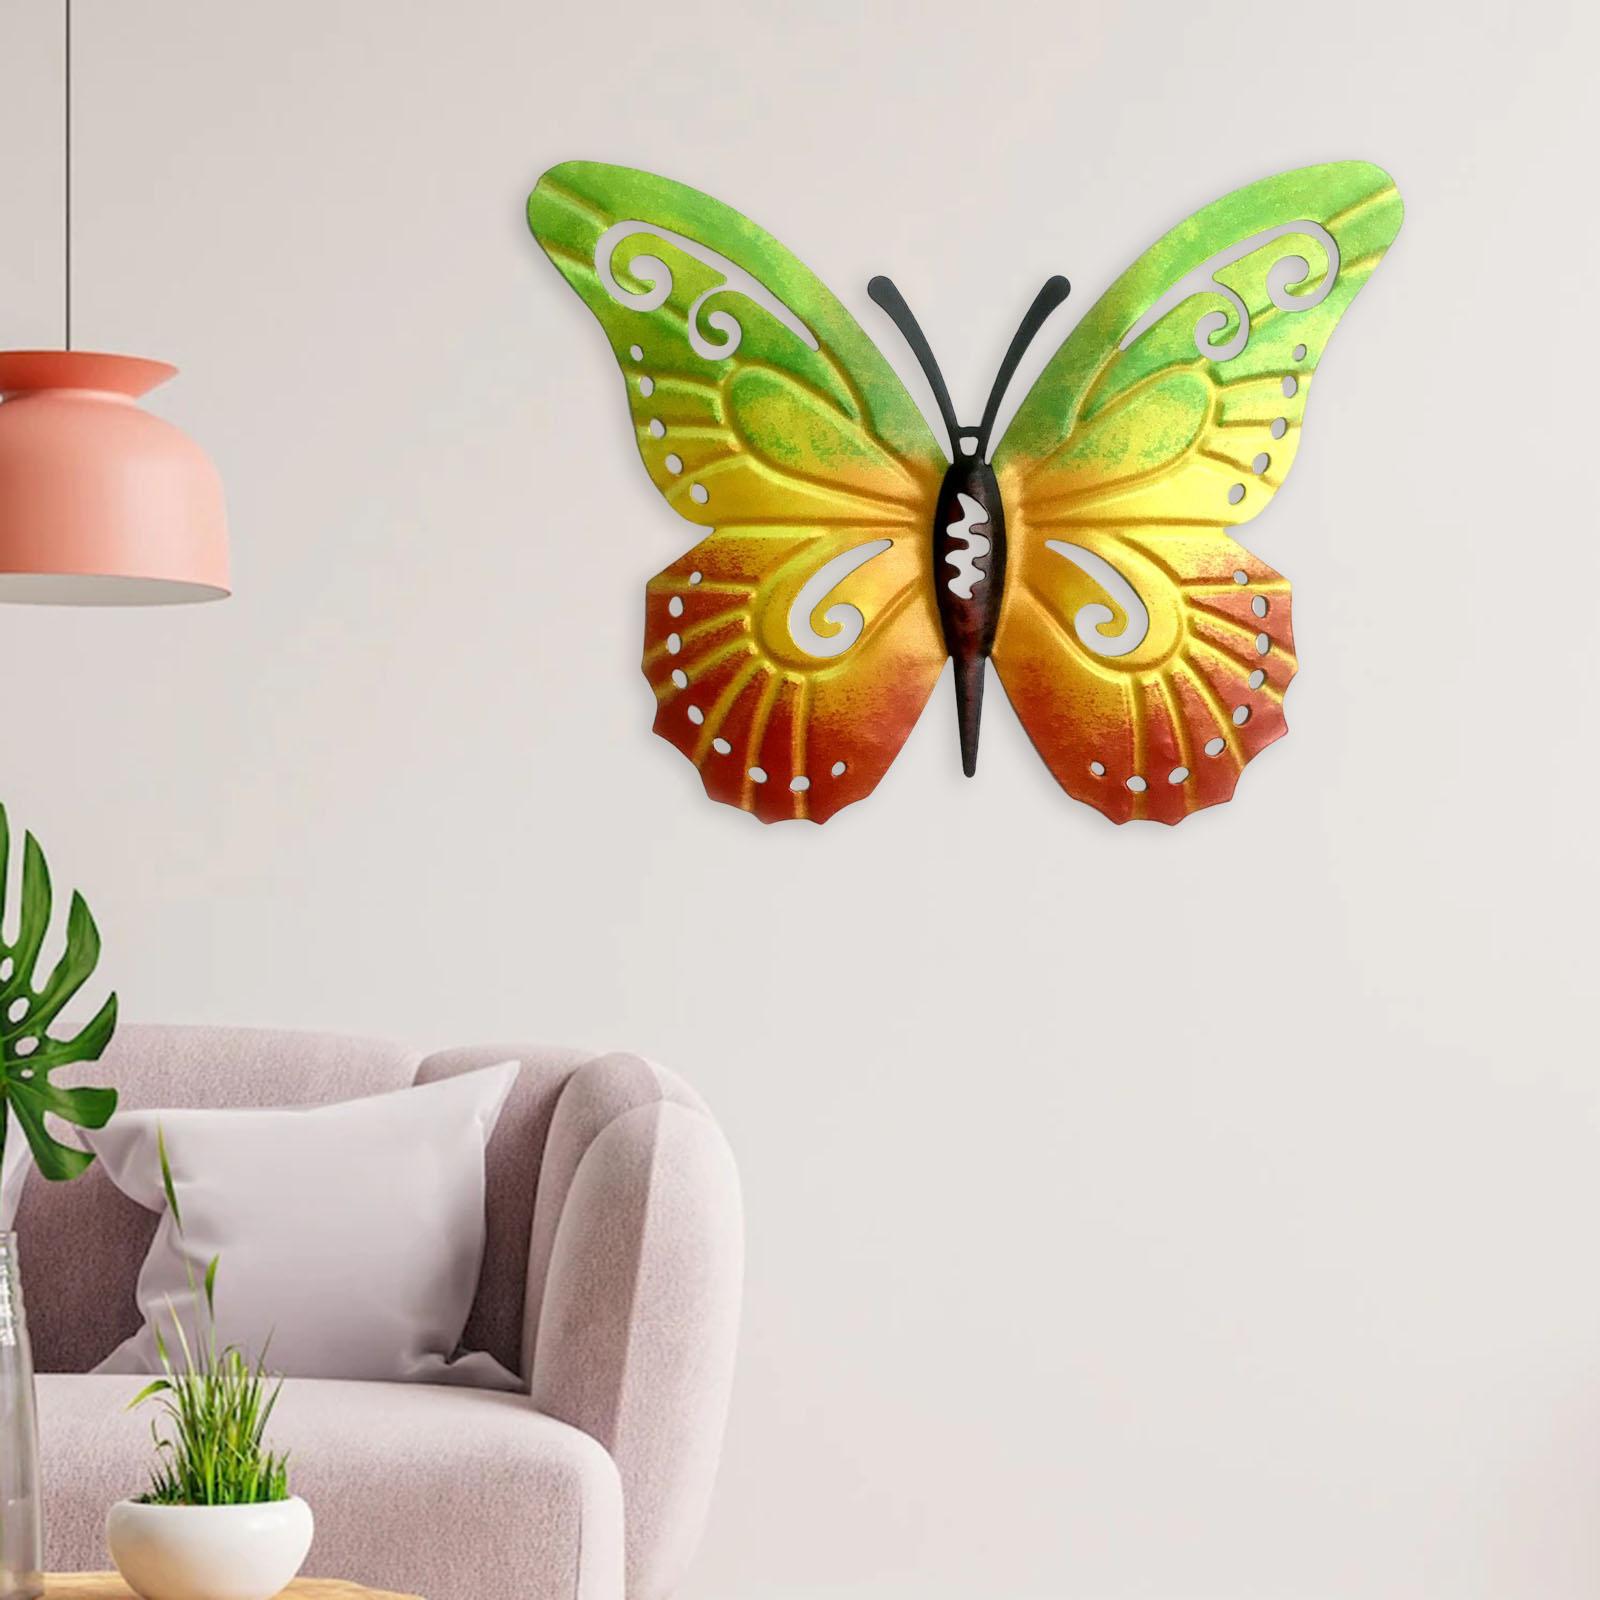 Butterfly Wall Decors Wall Sculptures Figurines for Garden Home Decors green yellow blue